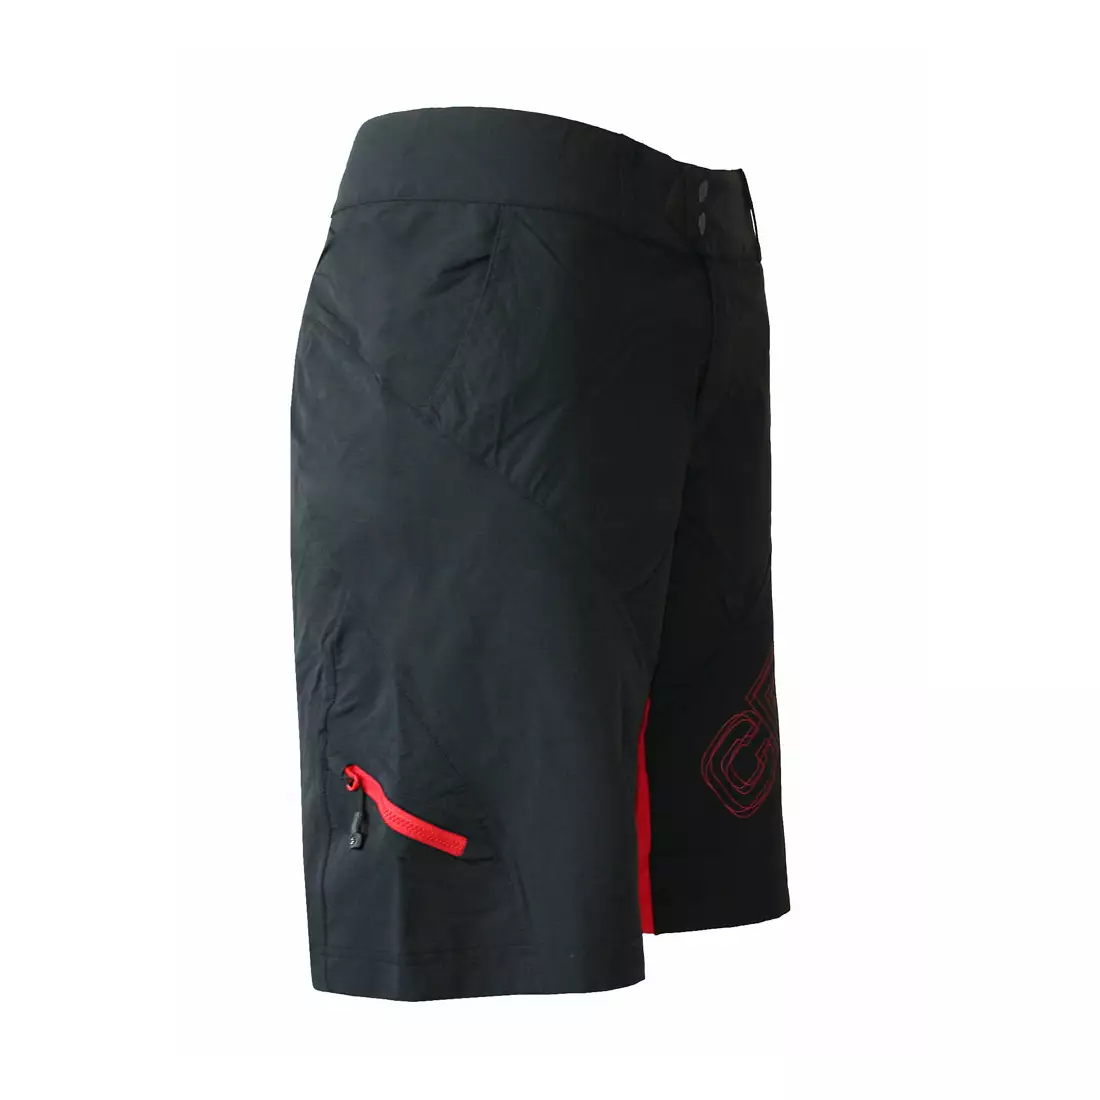 CRAFT ACTIVE BIKE - men's cycling shorts 1900700-9430, color: black and red